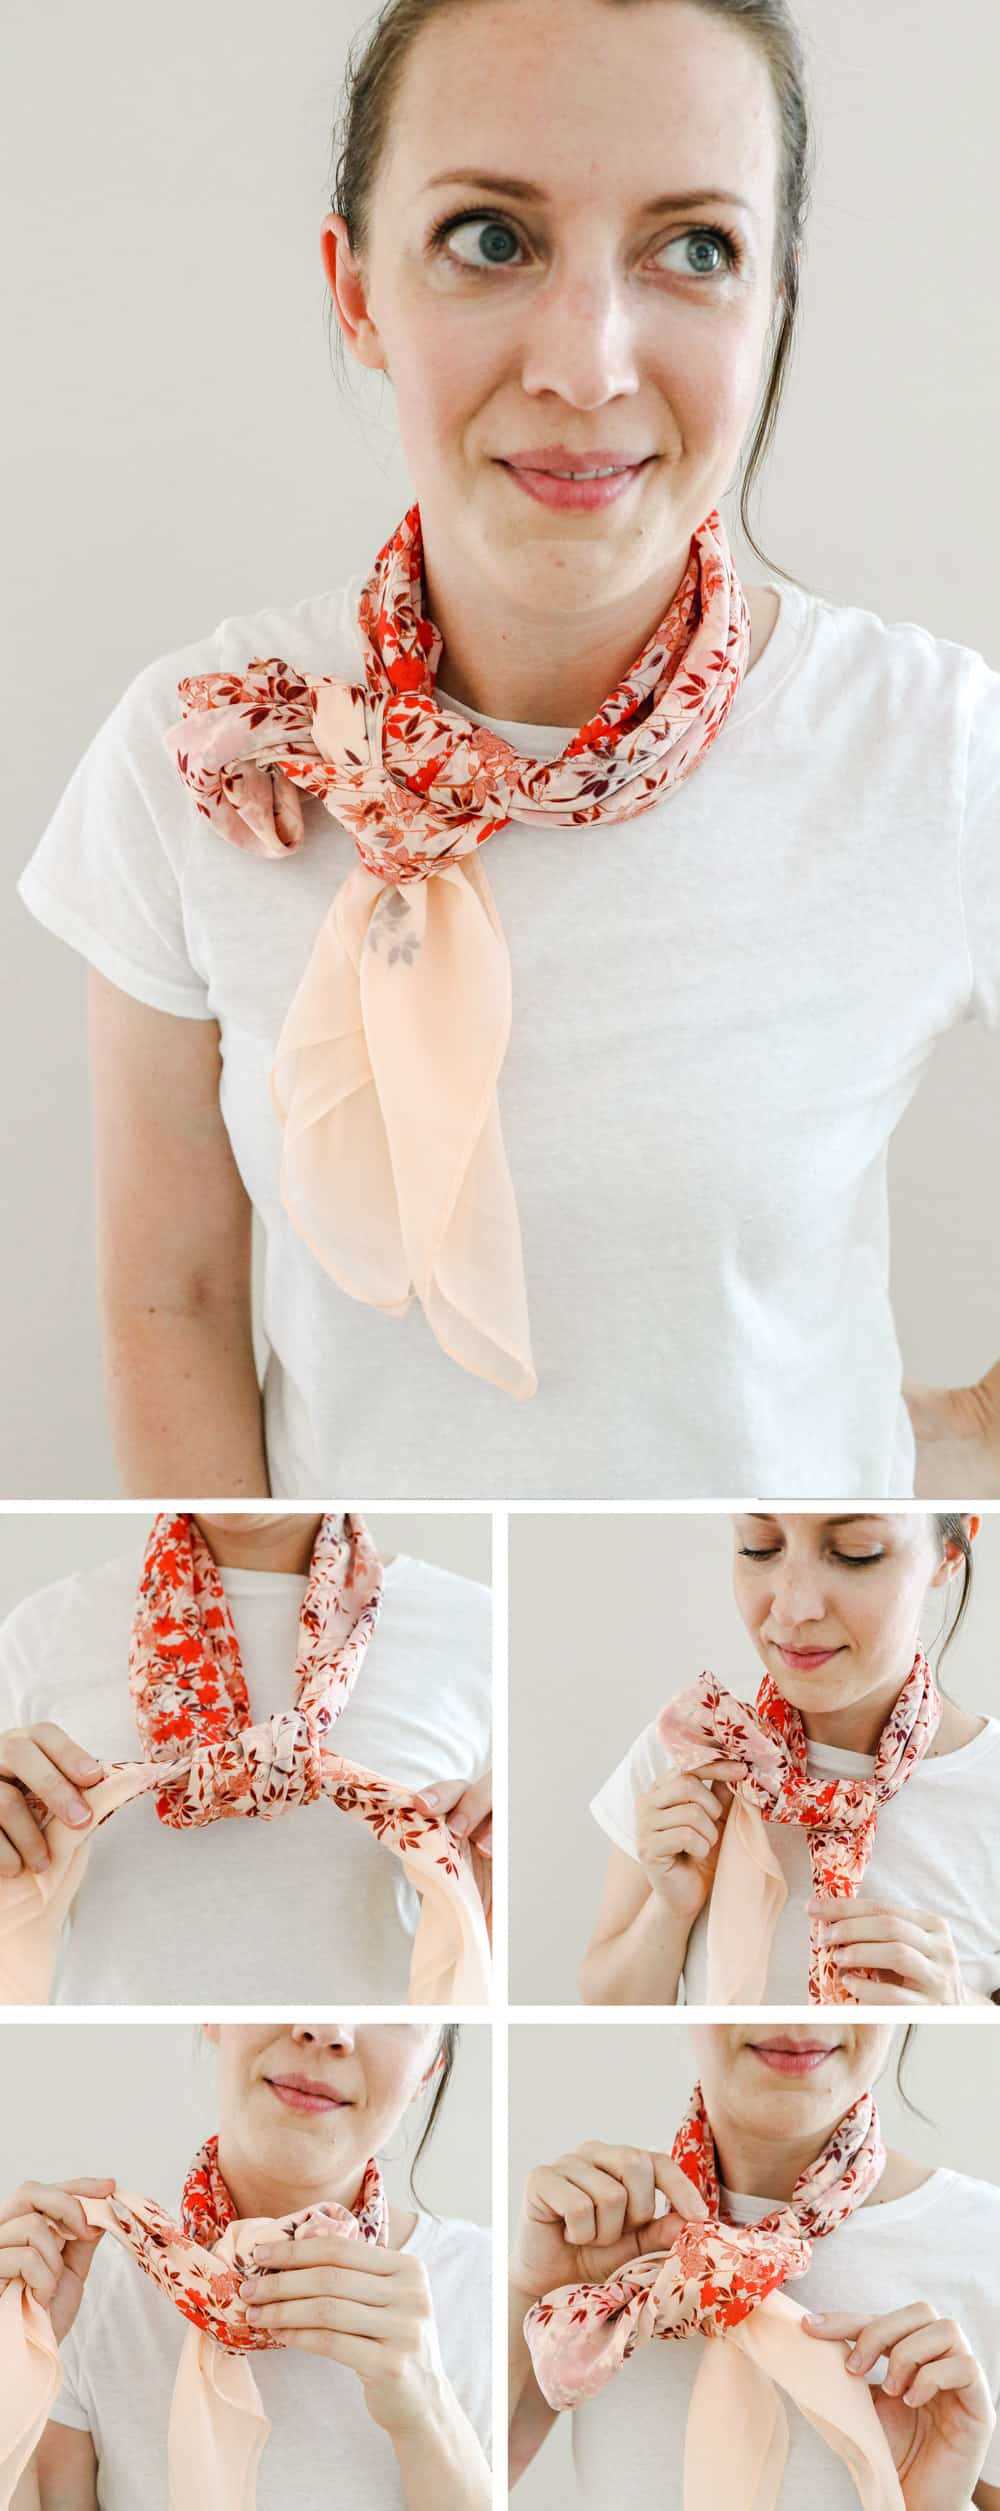 Scarf accessories to enhance your outfit